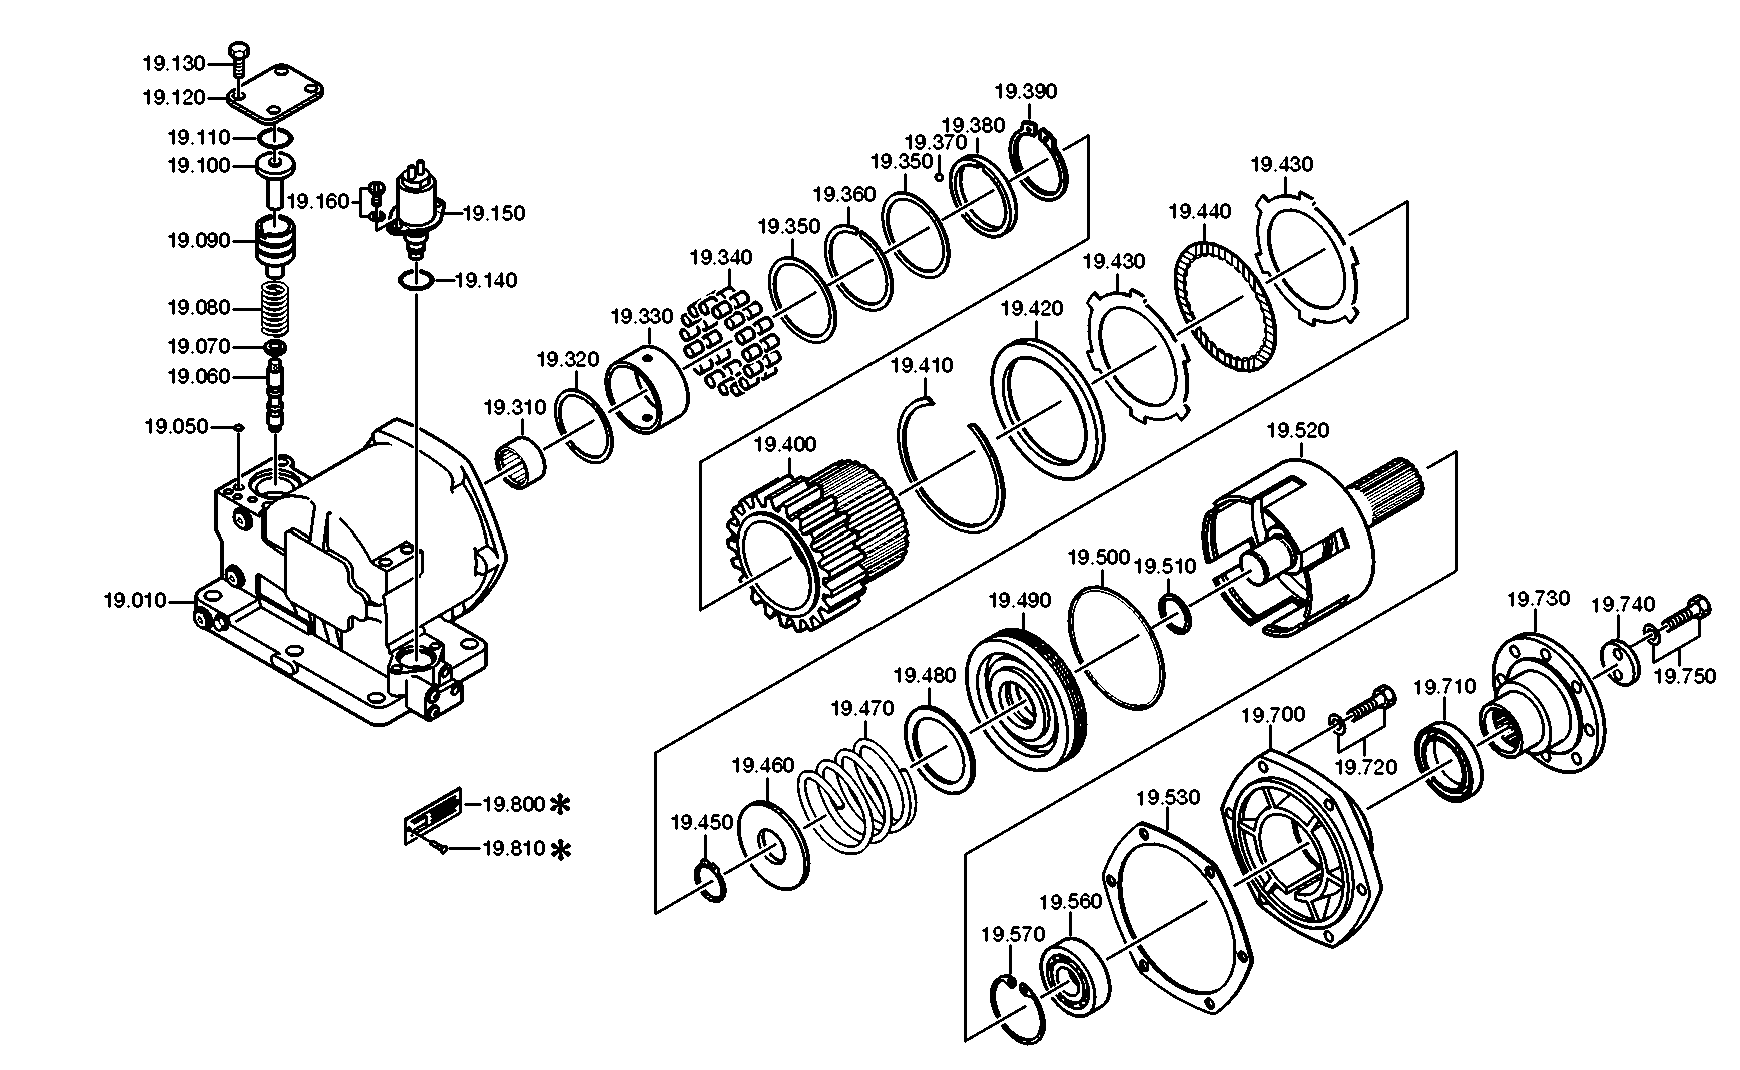 drawing for ALVIS VICKERS LTD. 1905305 - BALL BEARING (figure 4)